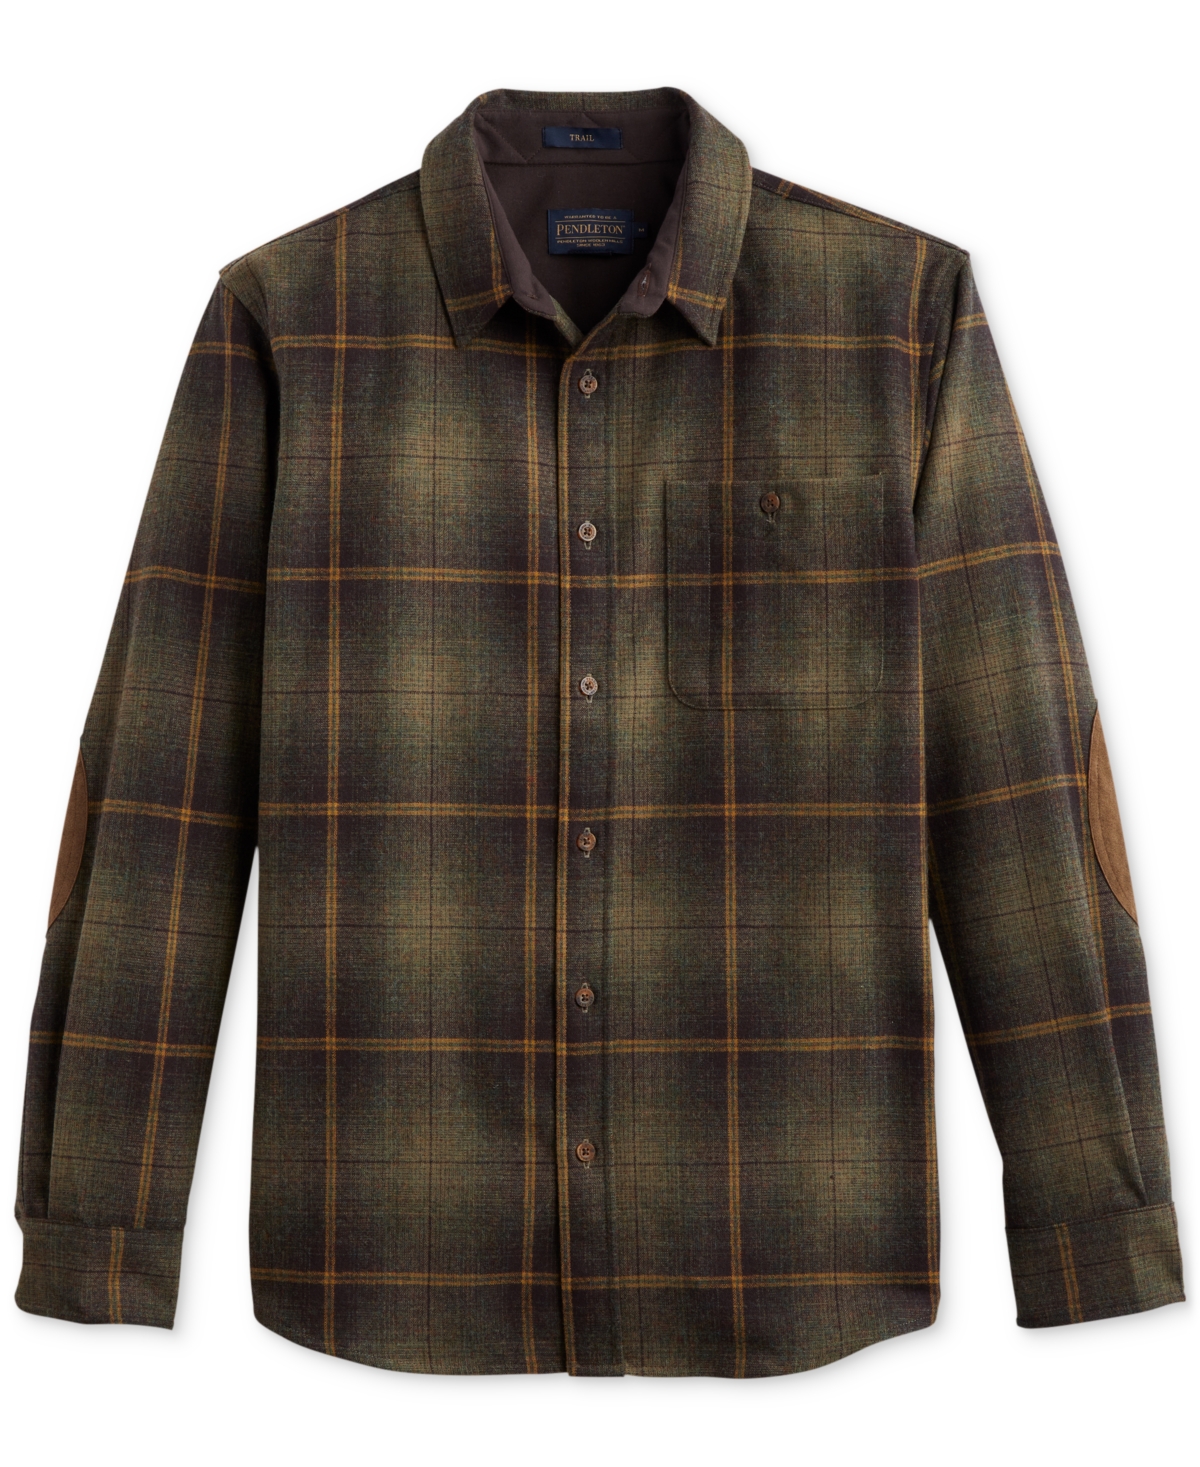 PENDLETON MEN'S TRAIL PLAID BUTTON-DOWN WOOL SHIRT WITH FAUX-SUEDE ELBOW PATCHES